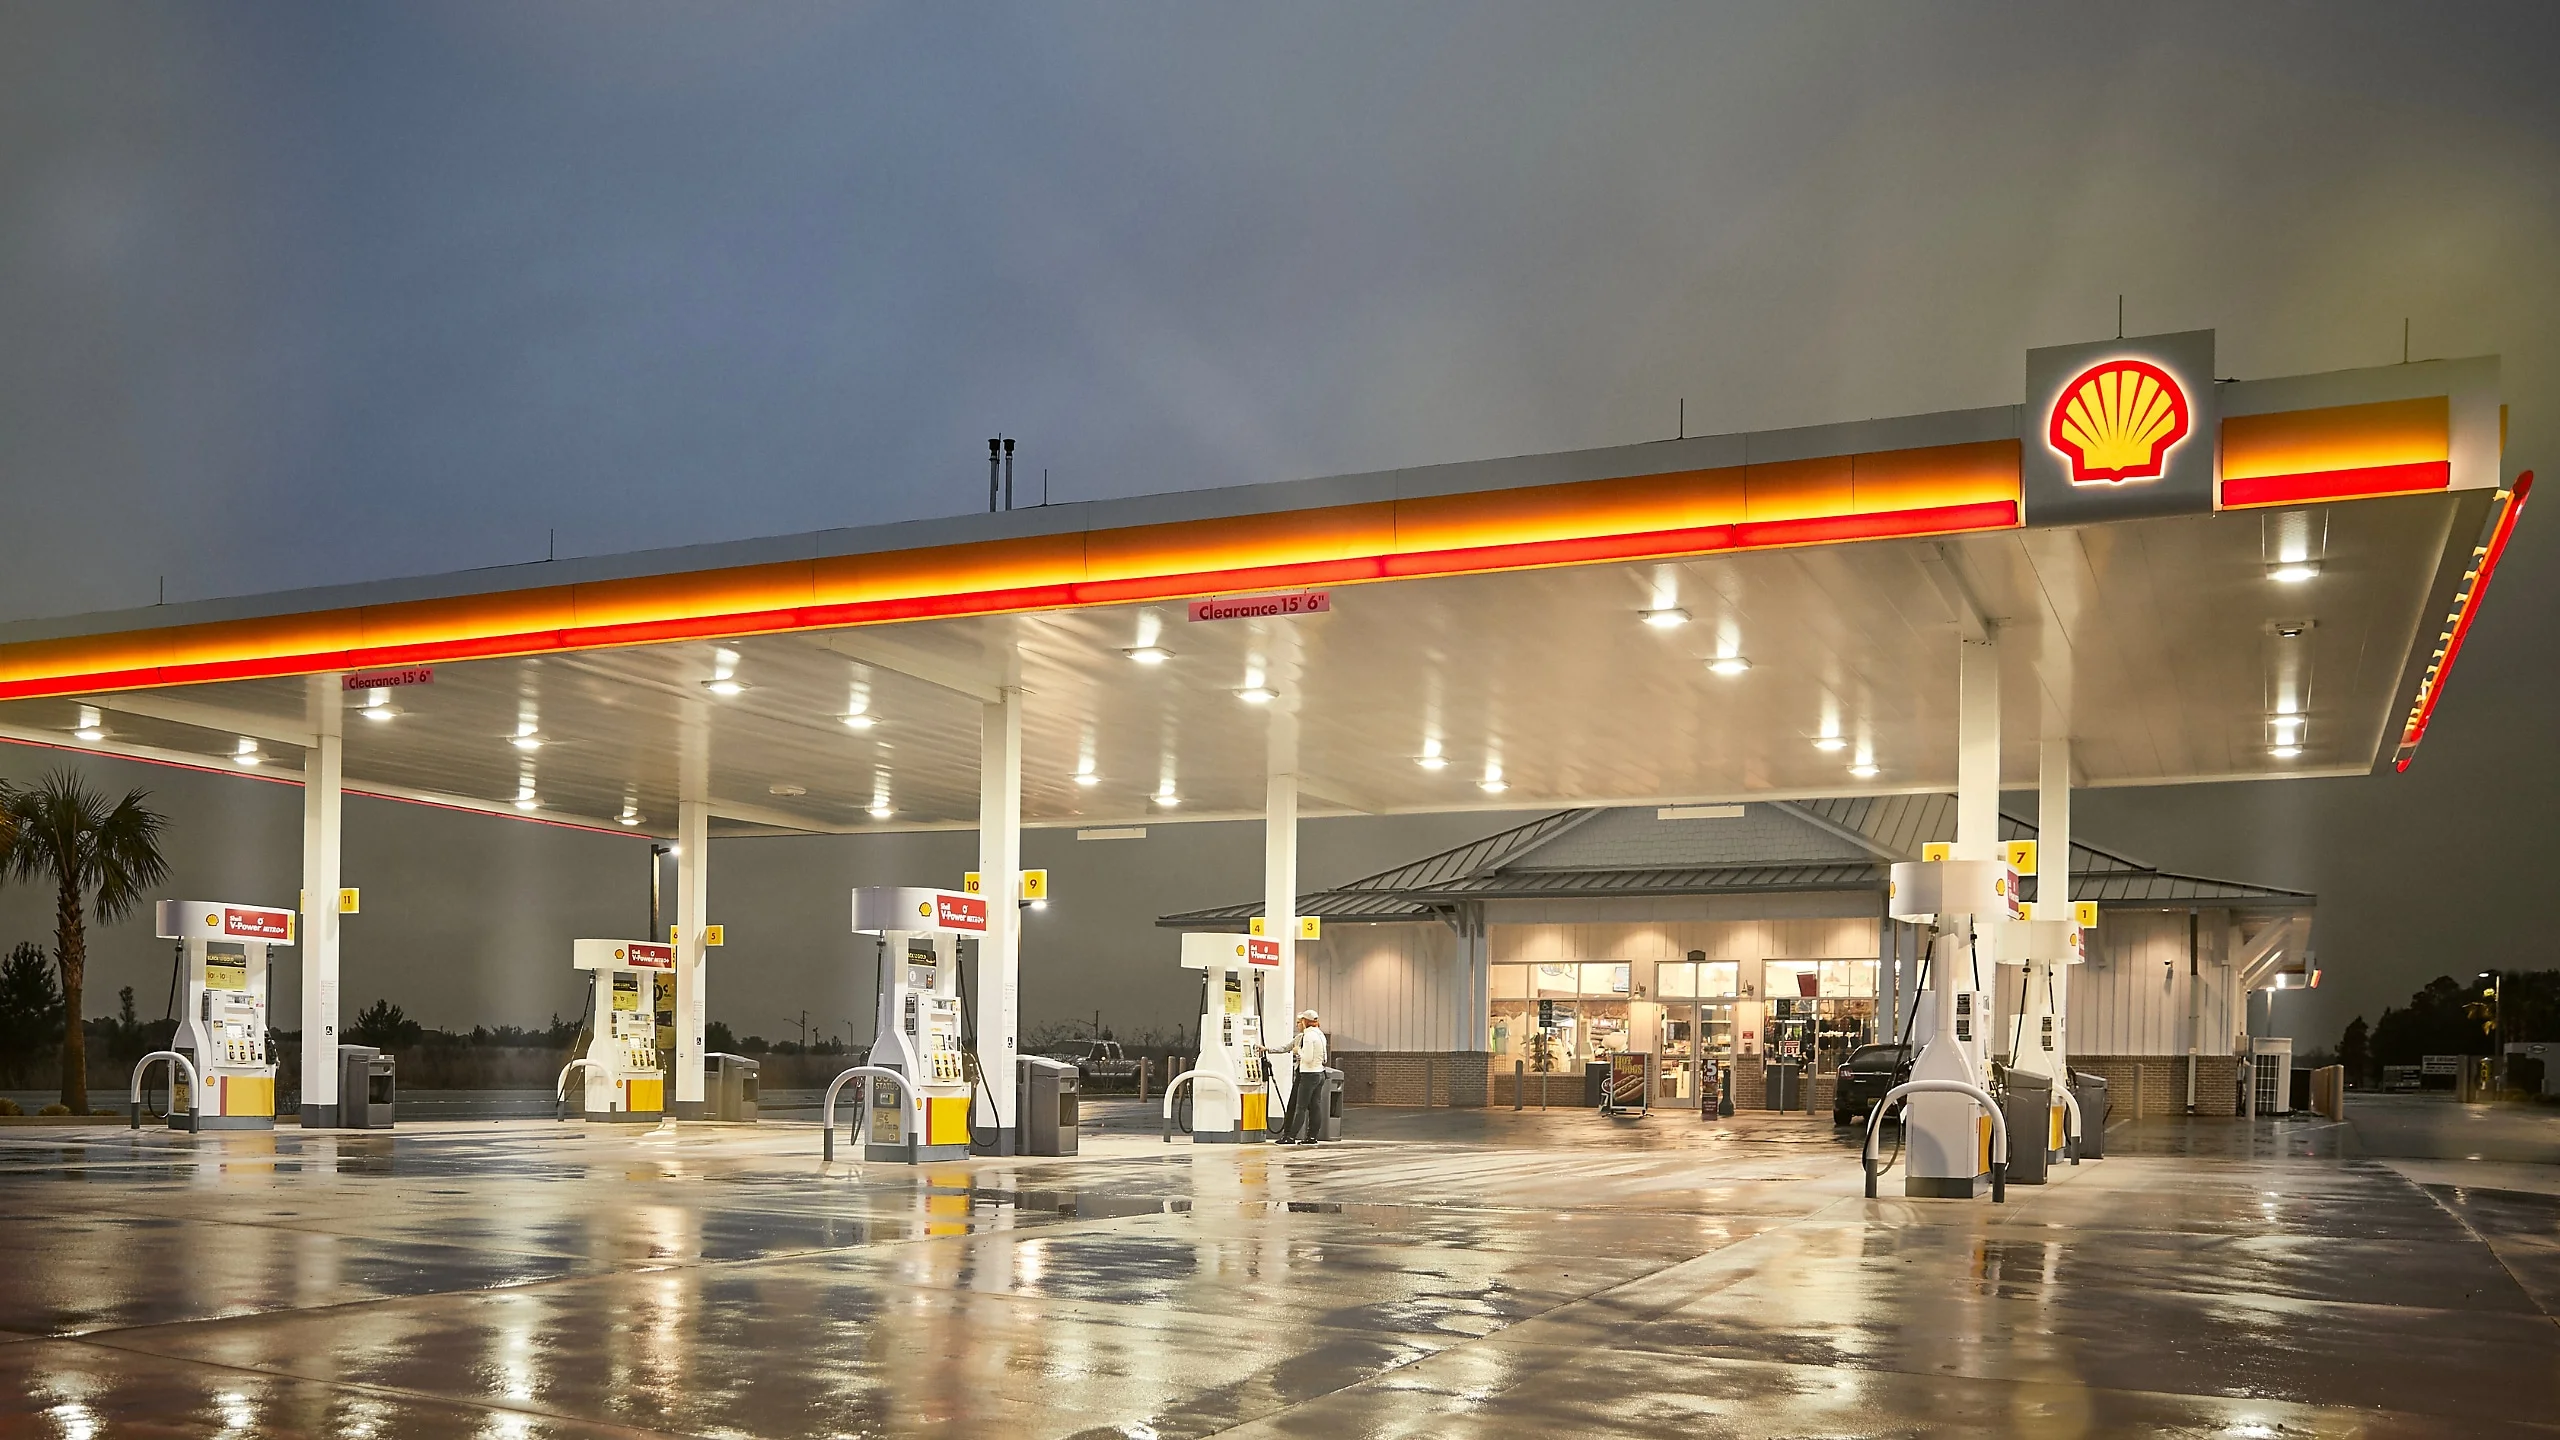 Shell gas station in USA